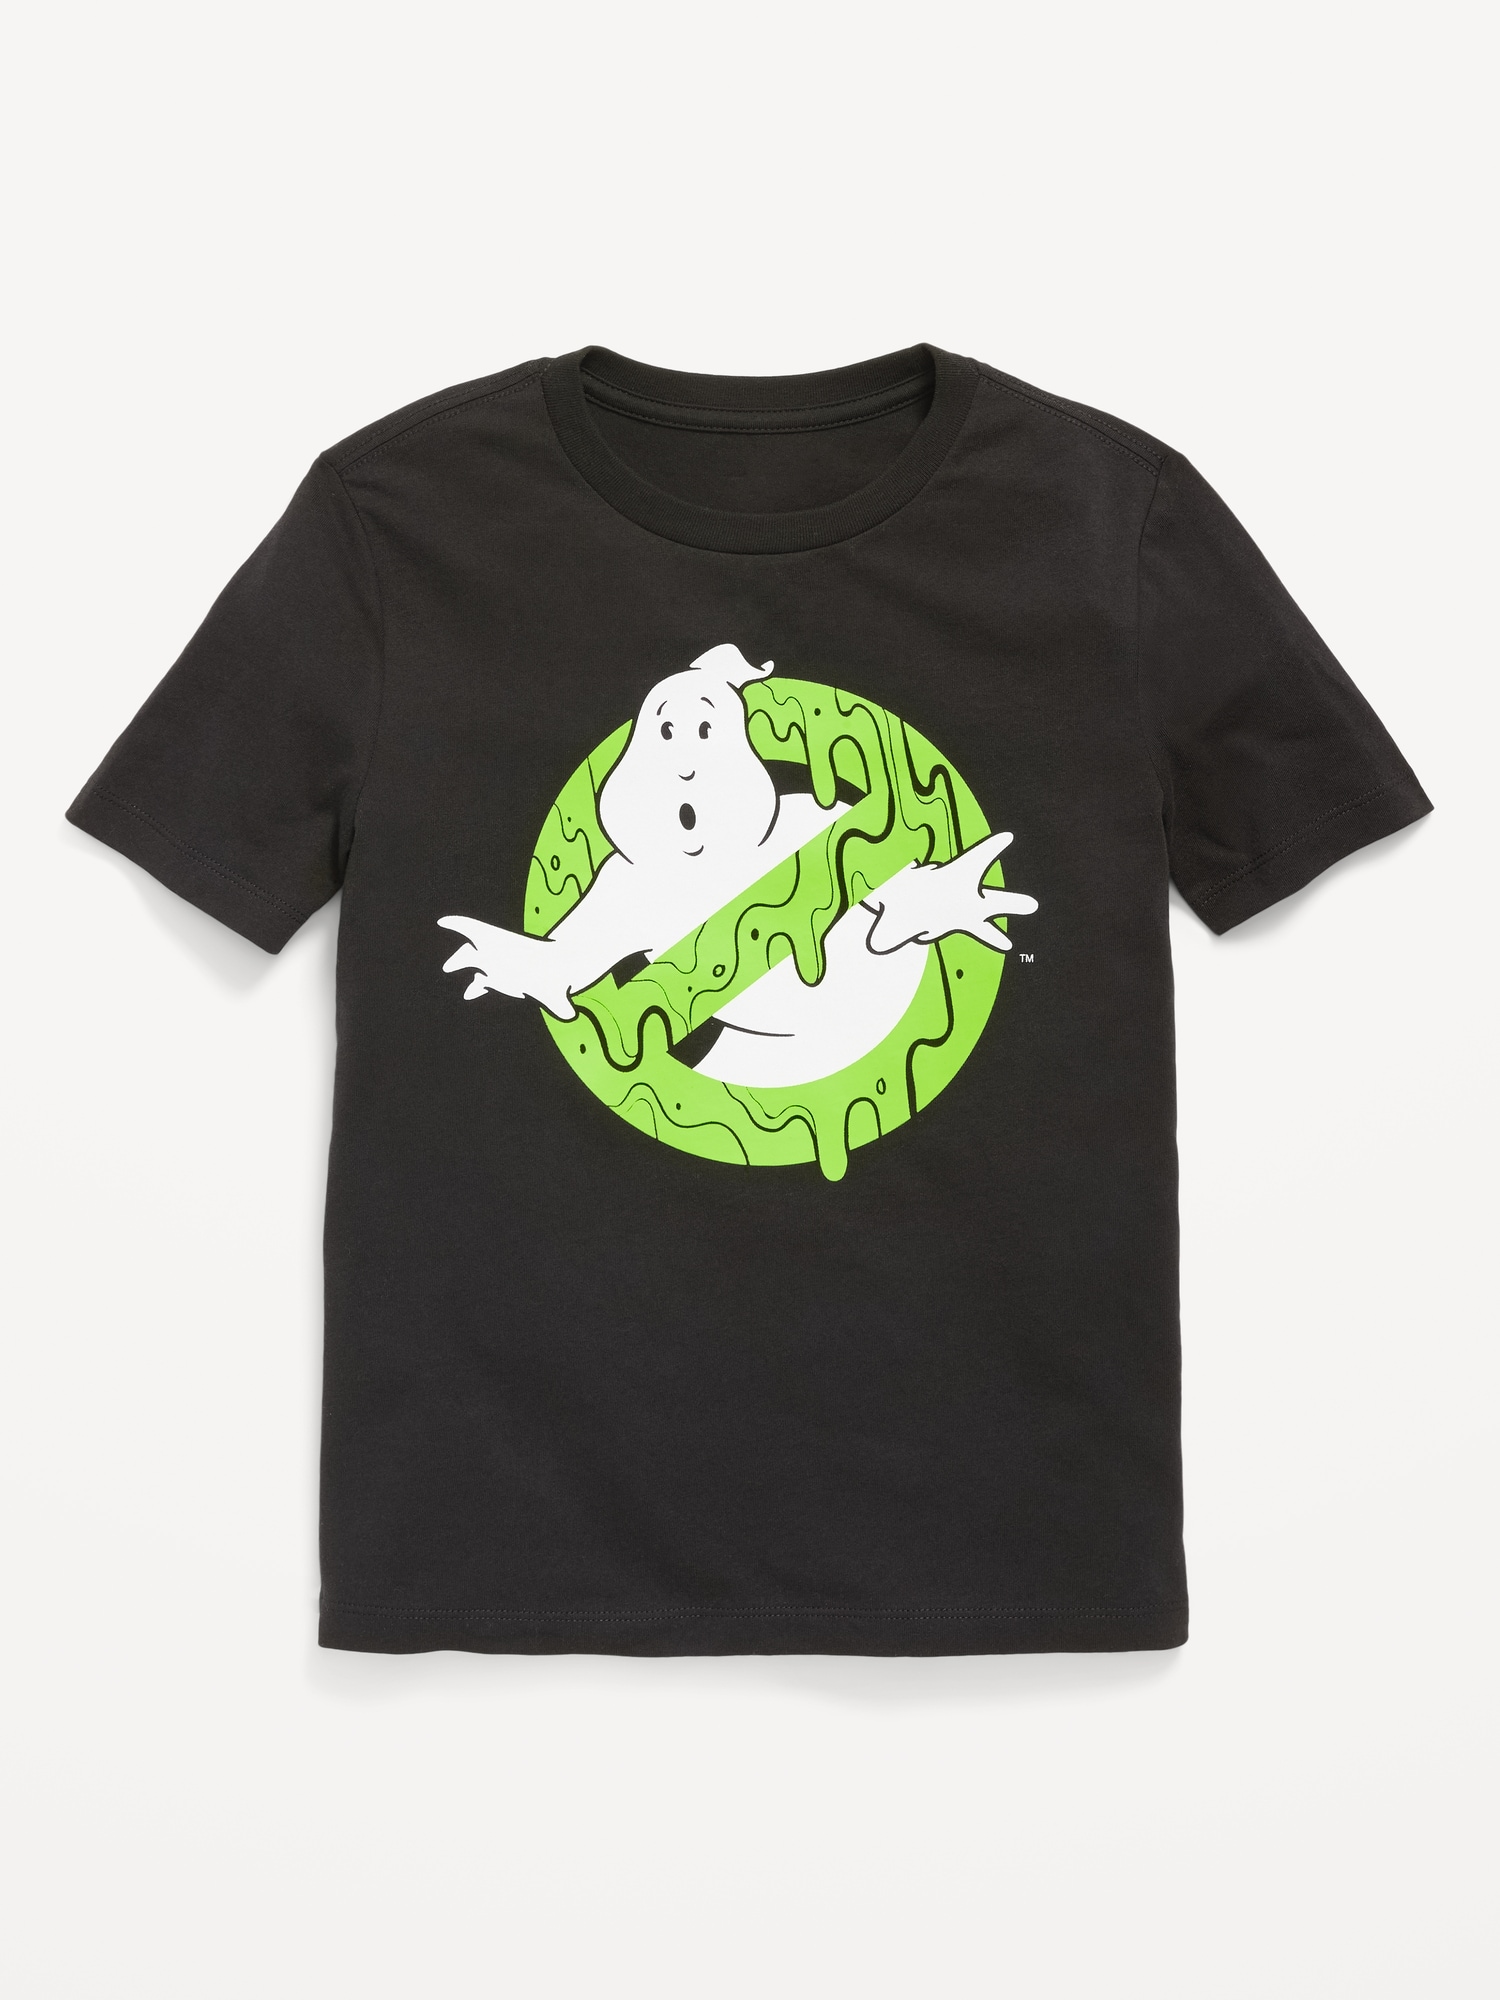 Ghostbusters™ Gender-Neutral Graphic T-Shirt for Kids